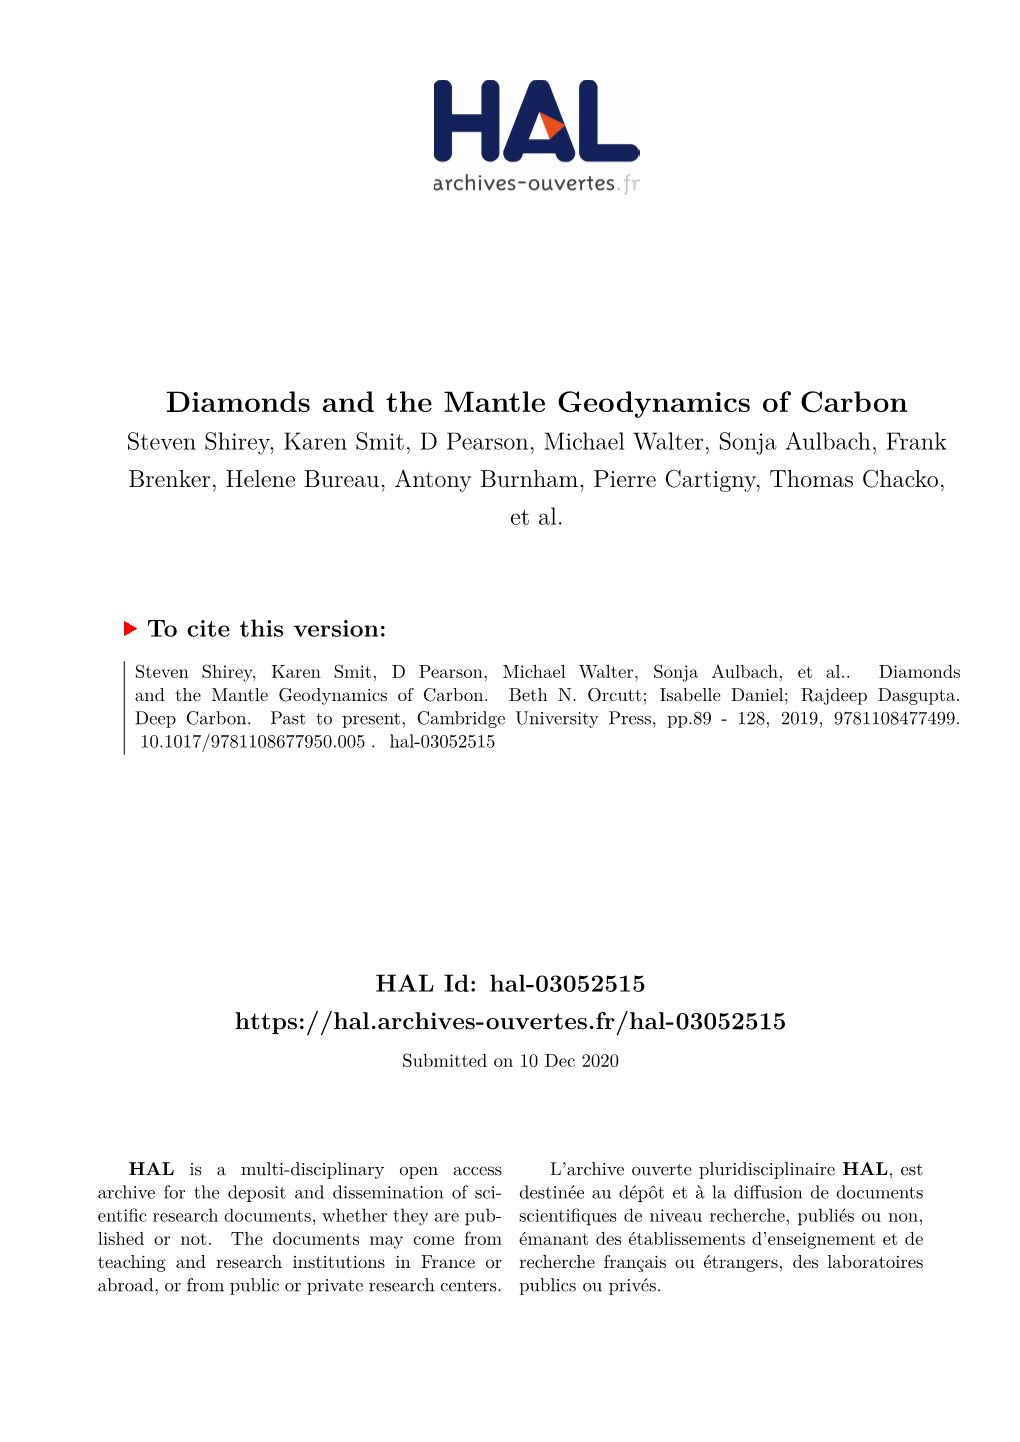 Diamonds and the Mantle Geodynamics of Carbon